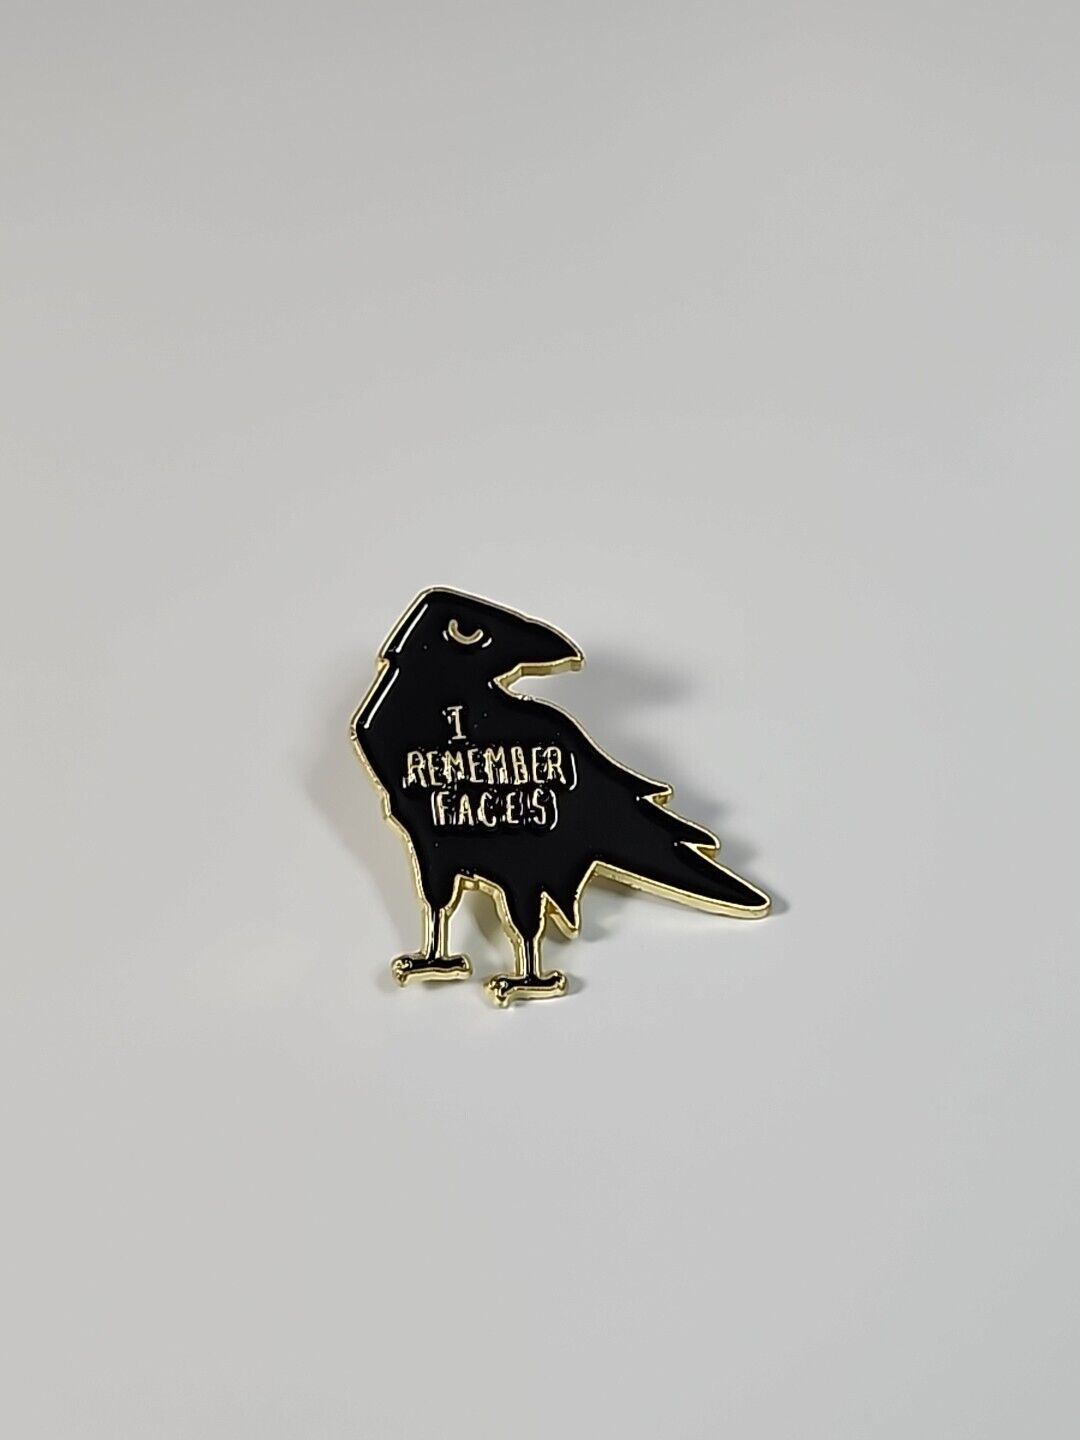 I Remember Faces Lapel Pin Angry Black Crow